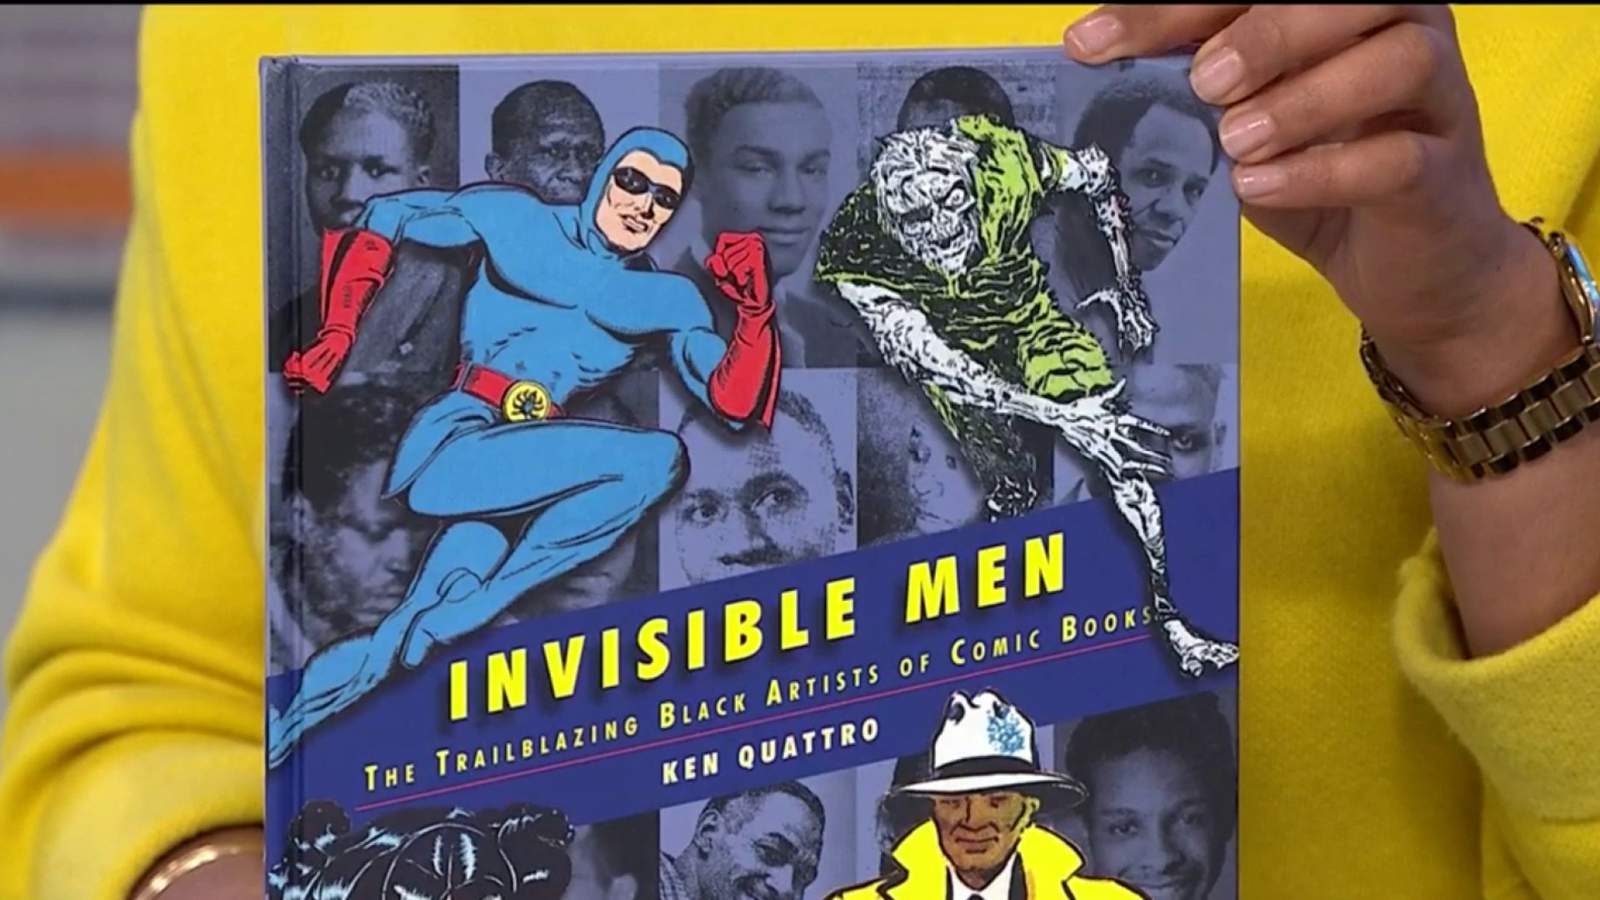 Unmasking the invisible men of the comic book world